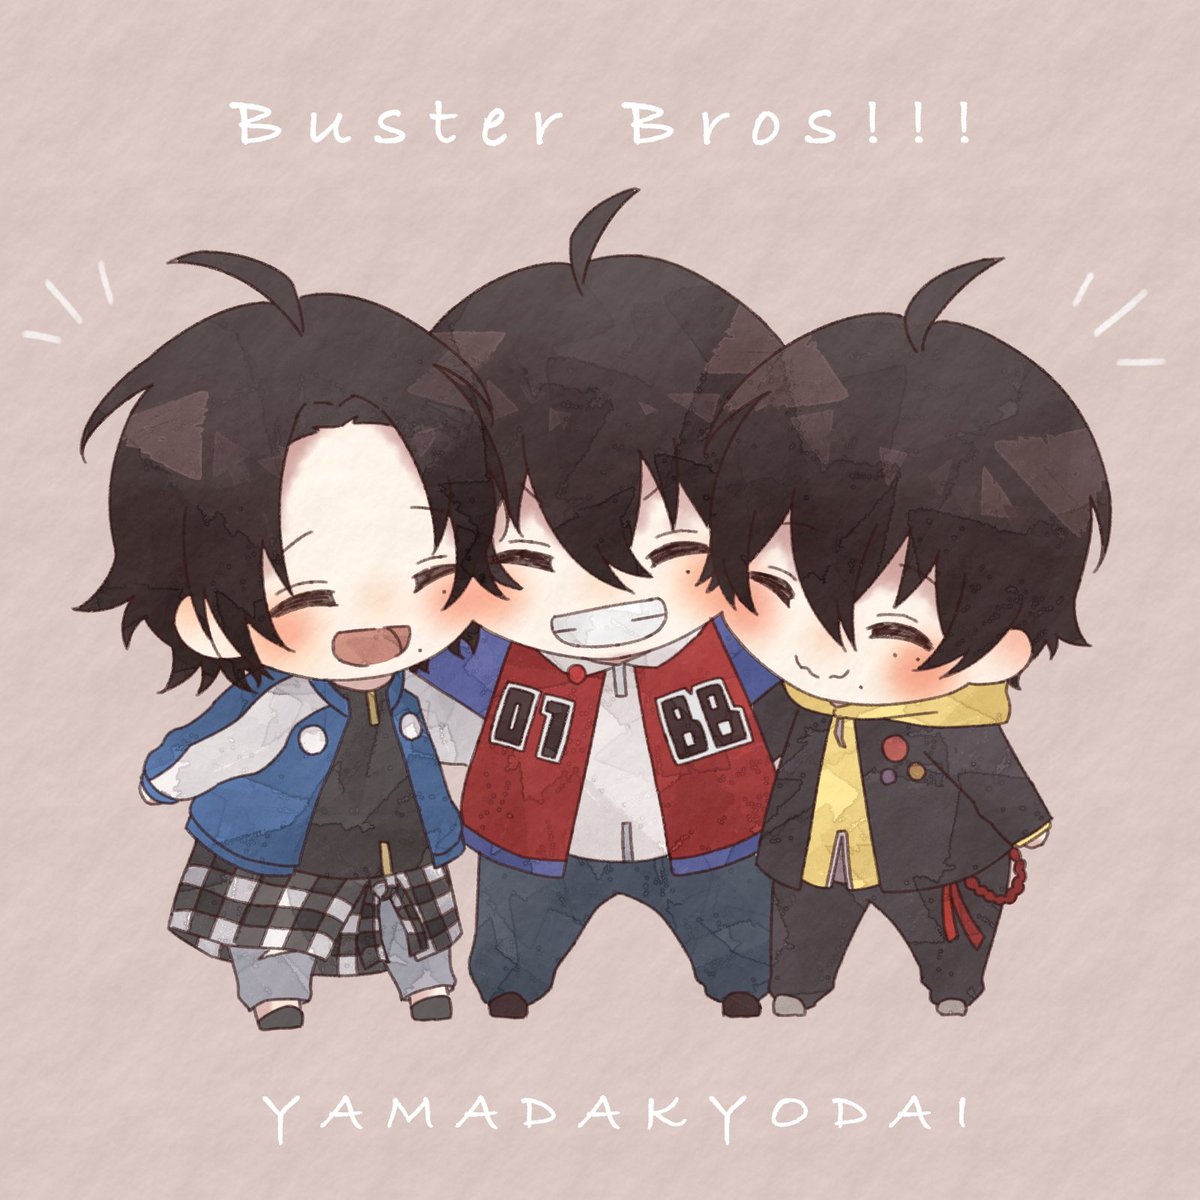 「We're Buster Bros!!! 」|芋米トイのイラスト